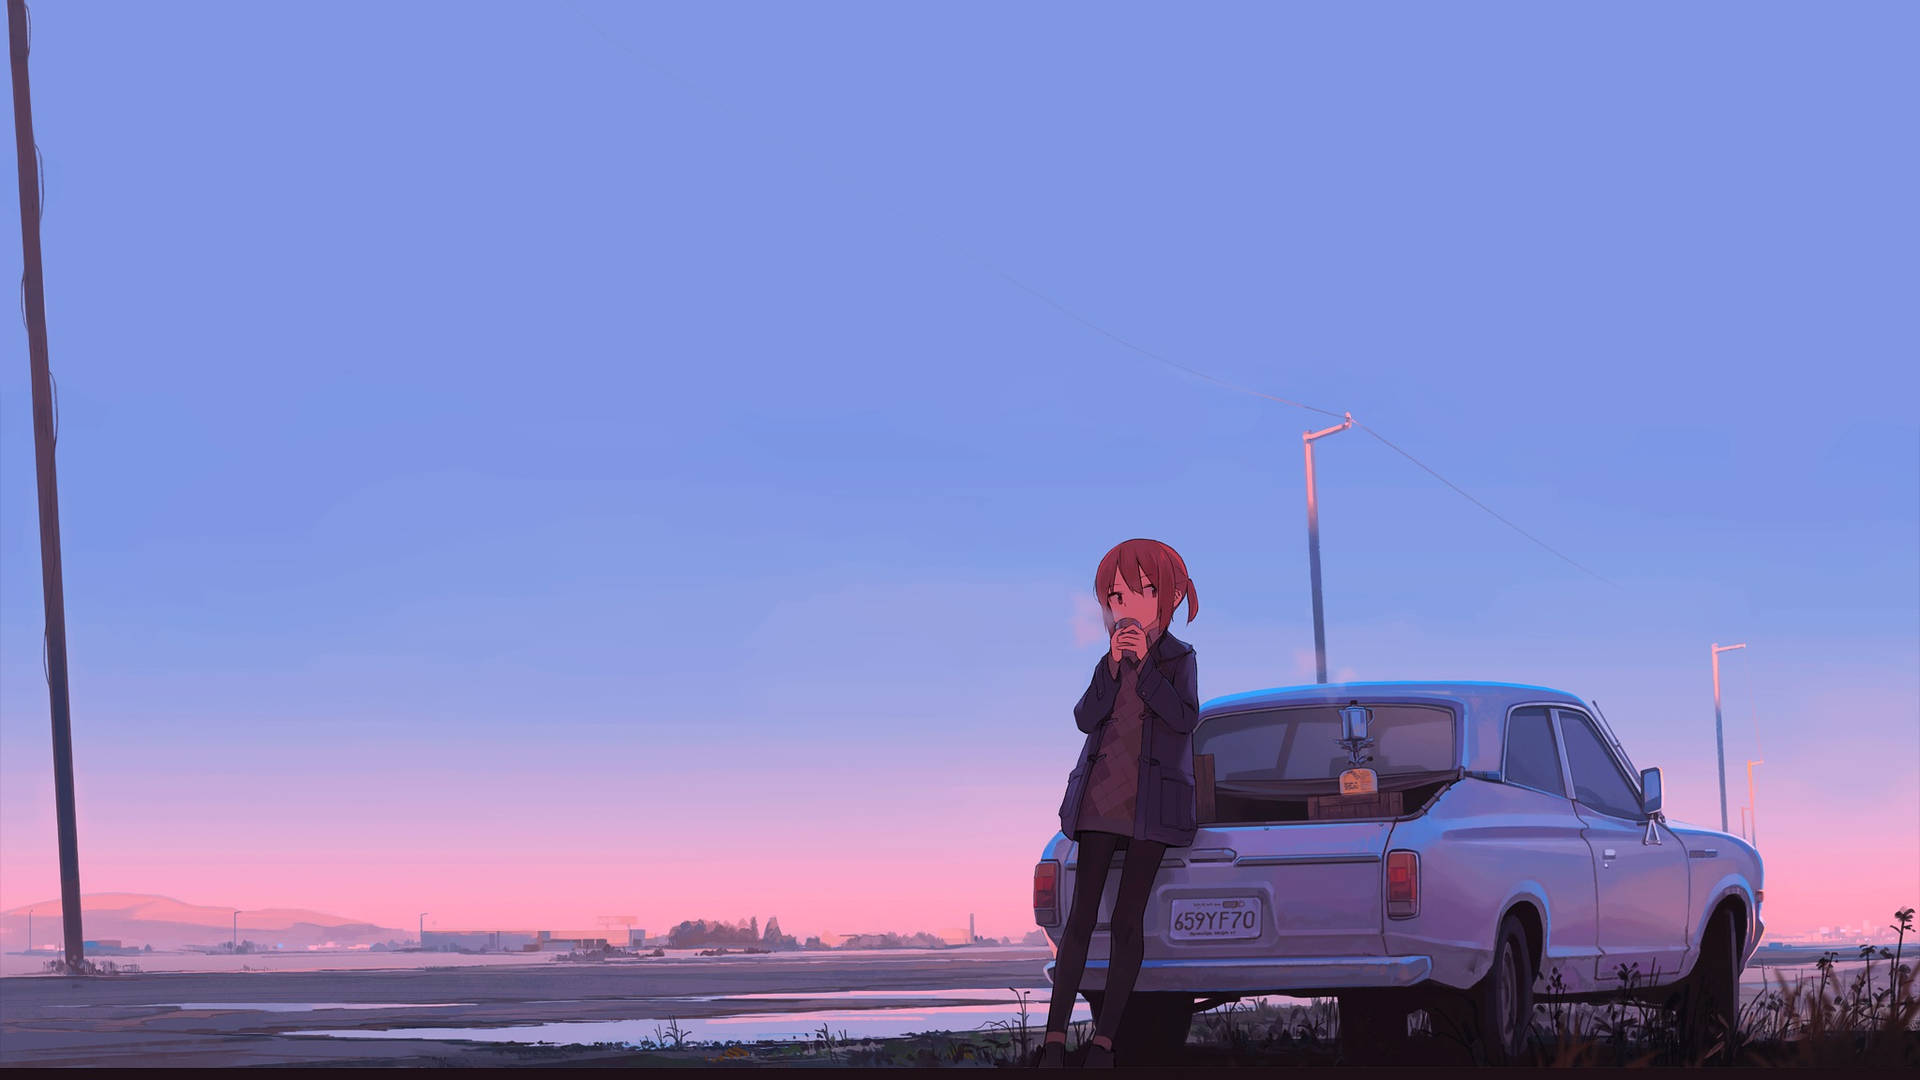 Anime Aesthetic Girl On Car For Computer Background